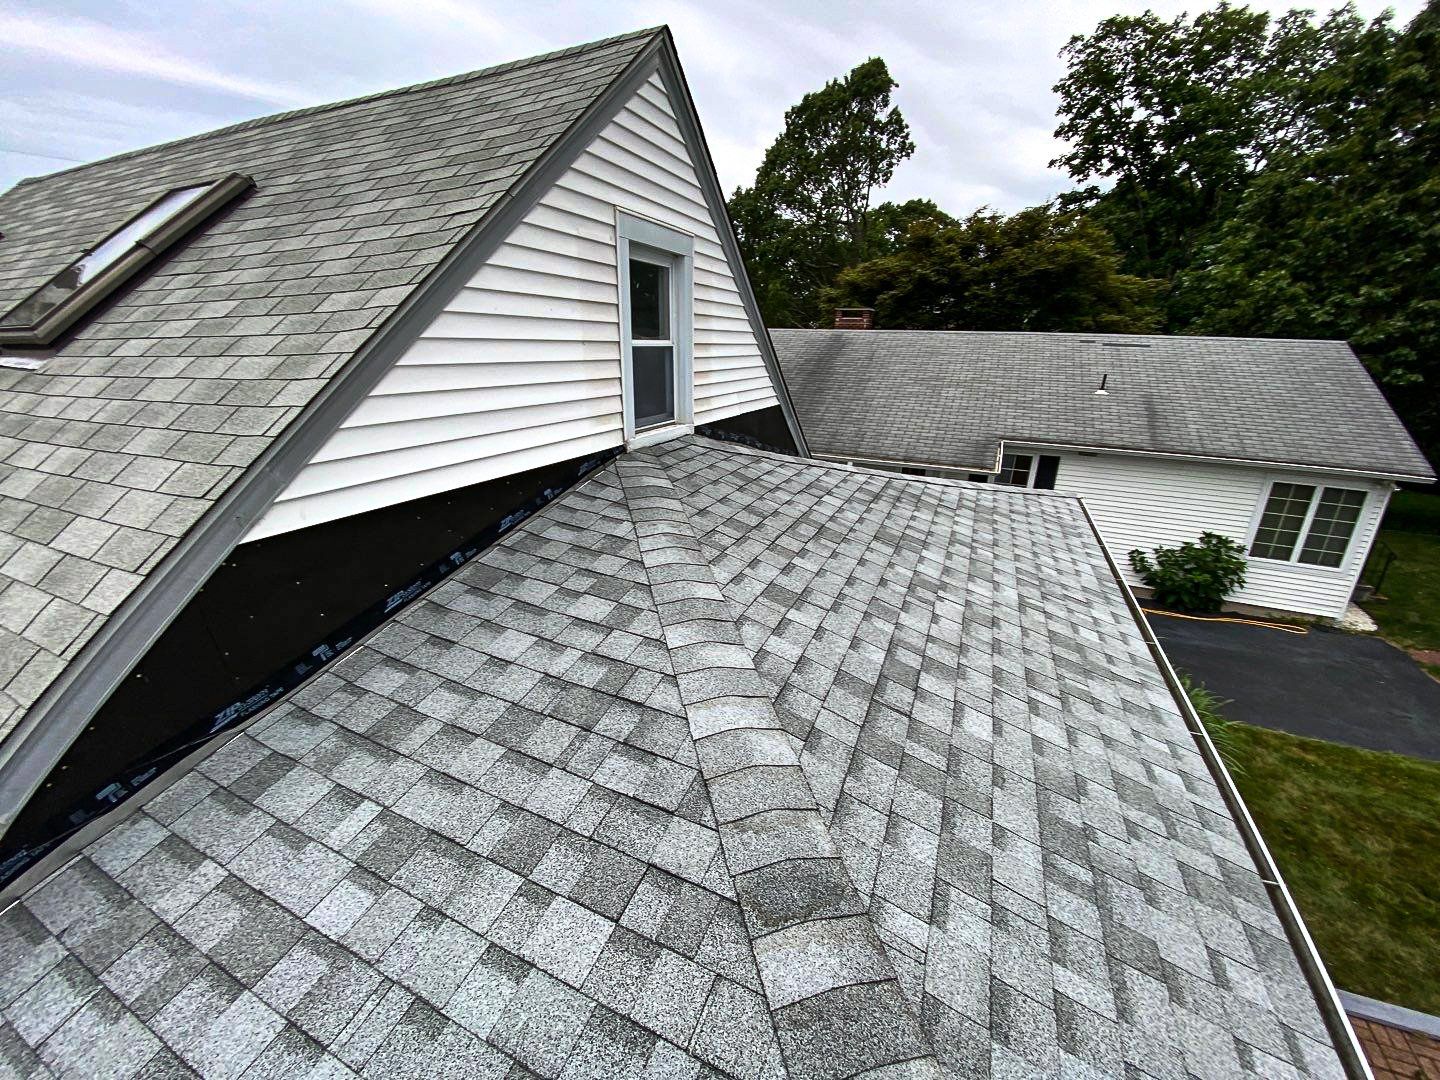 New House Roof Installation - Martin Roofing & Remodeling, LLC - Killingworth, CT